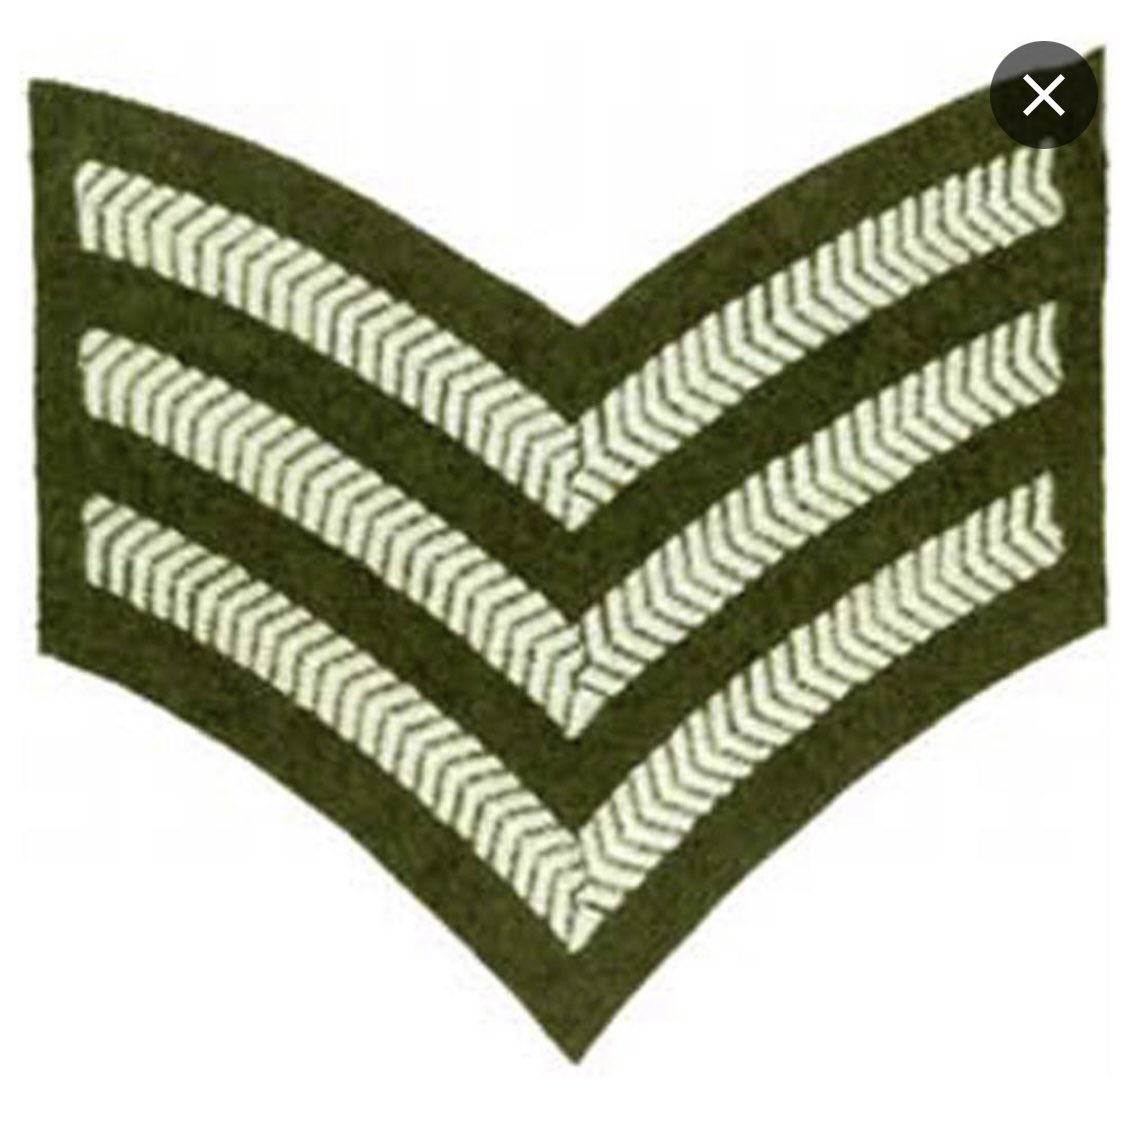 Congratulations to all that were selected for promotion to Sergeant today within @2MedX. A fantastic achievement and significant milestone. @ArmyMedServices